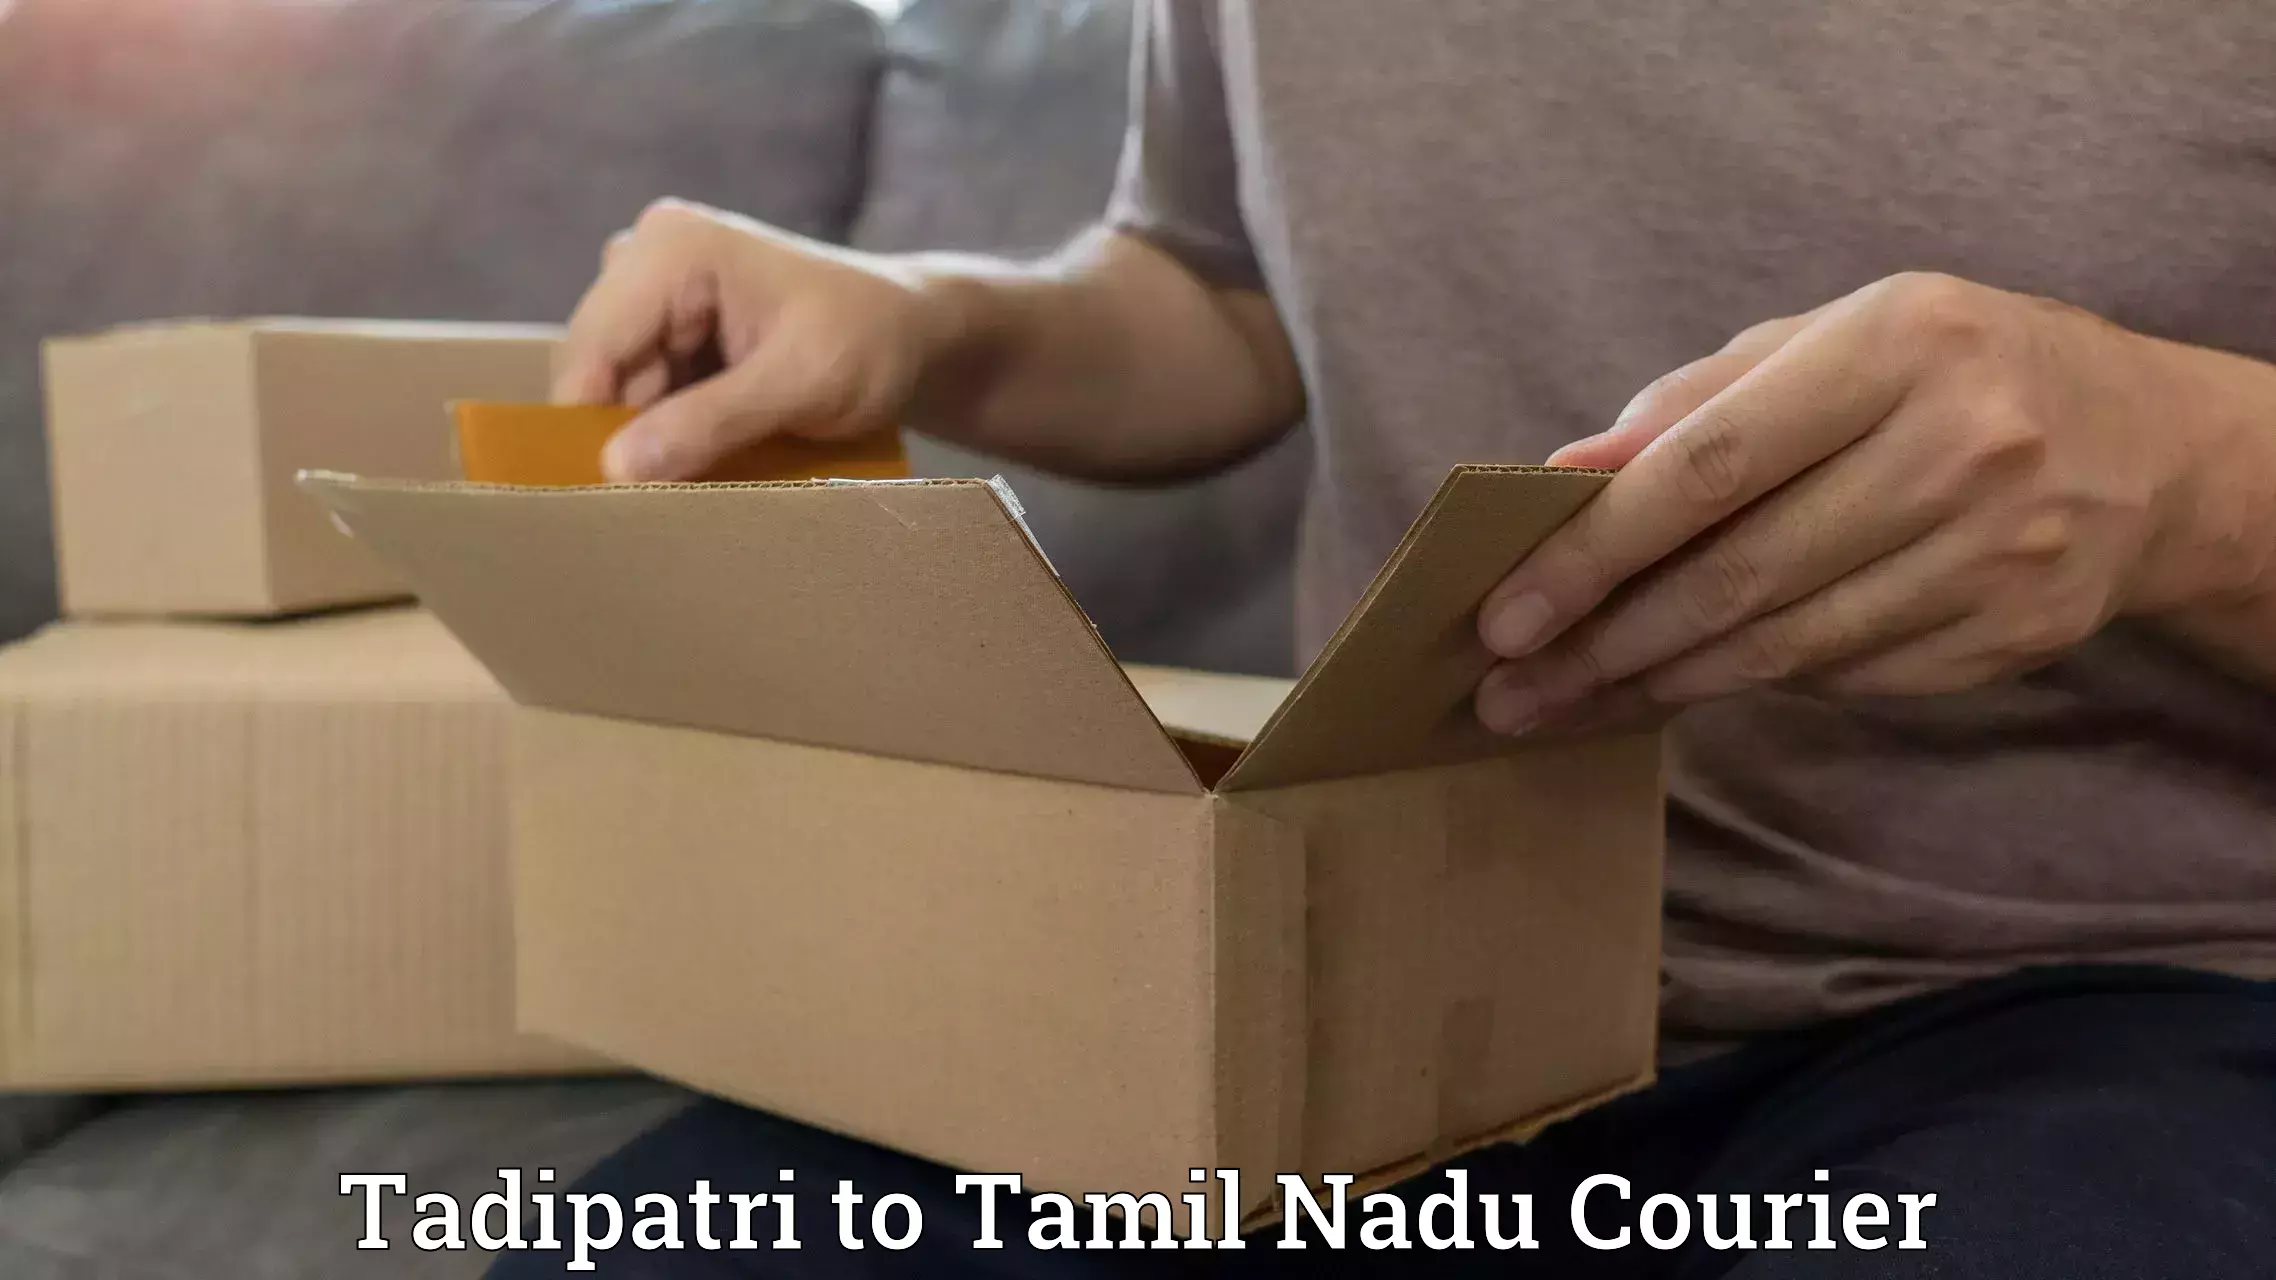 Customizable shipping options Tadipatri to Shanmugha Arts Science Technology and Research Academy Thanjavur